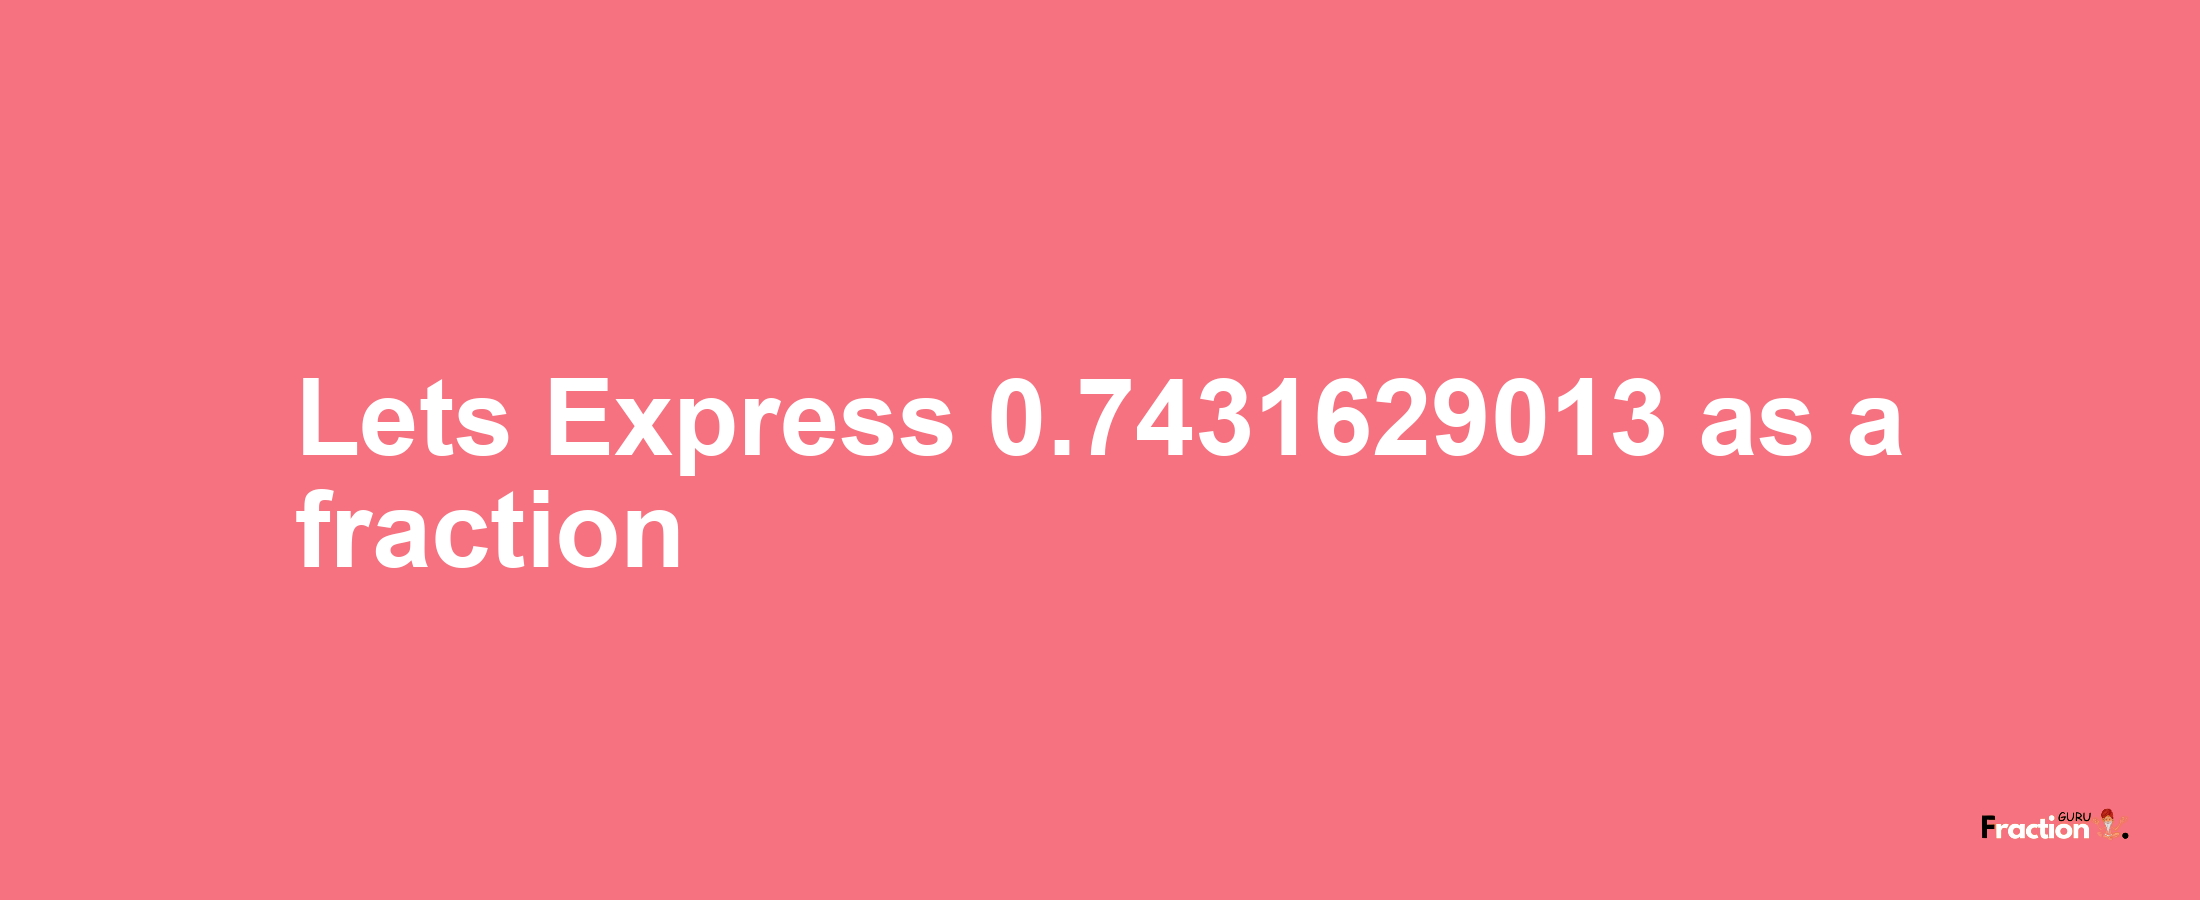 Lets Express 0.7431629013 as afraction